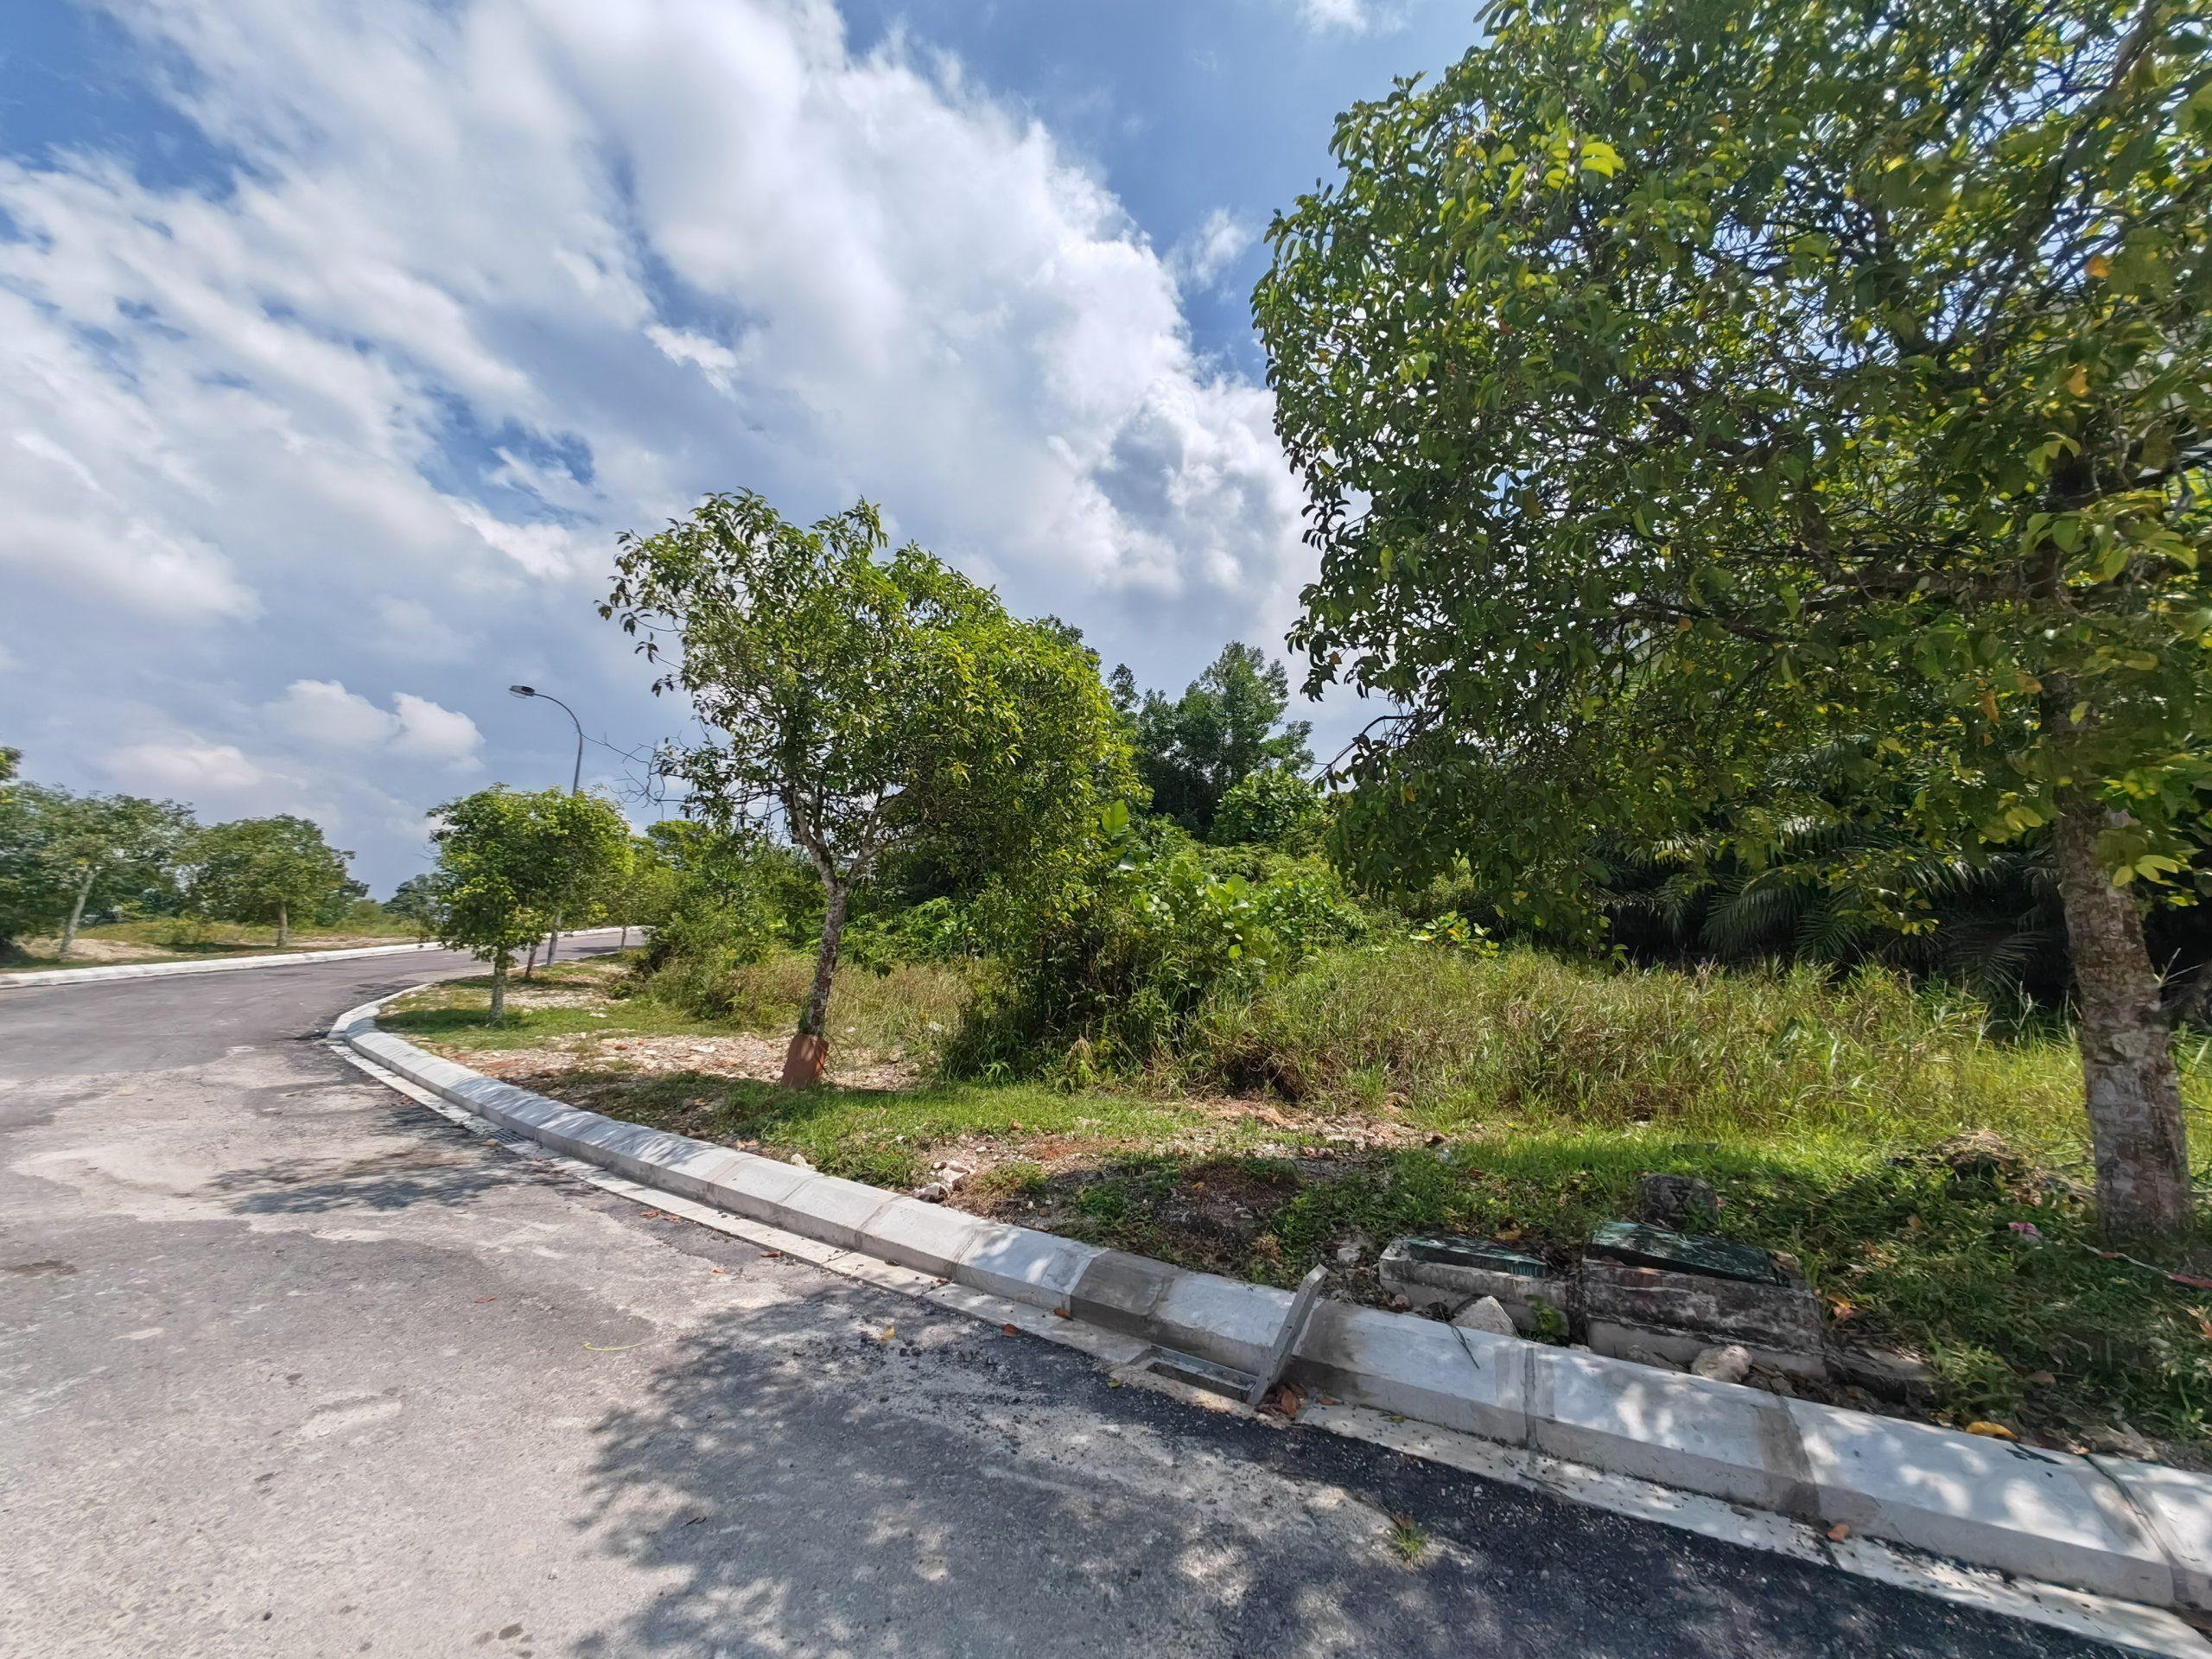 Ledang Heights Super Offer Price Bungalow Land